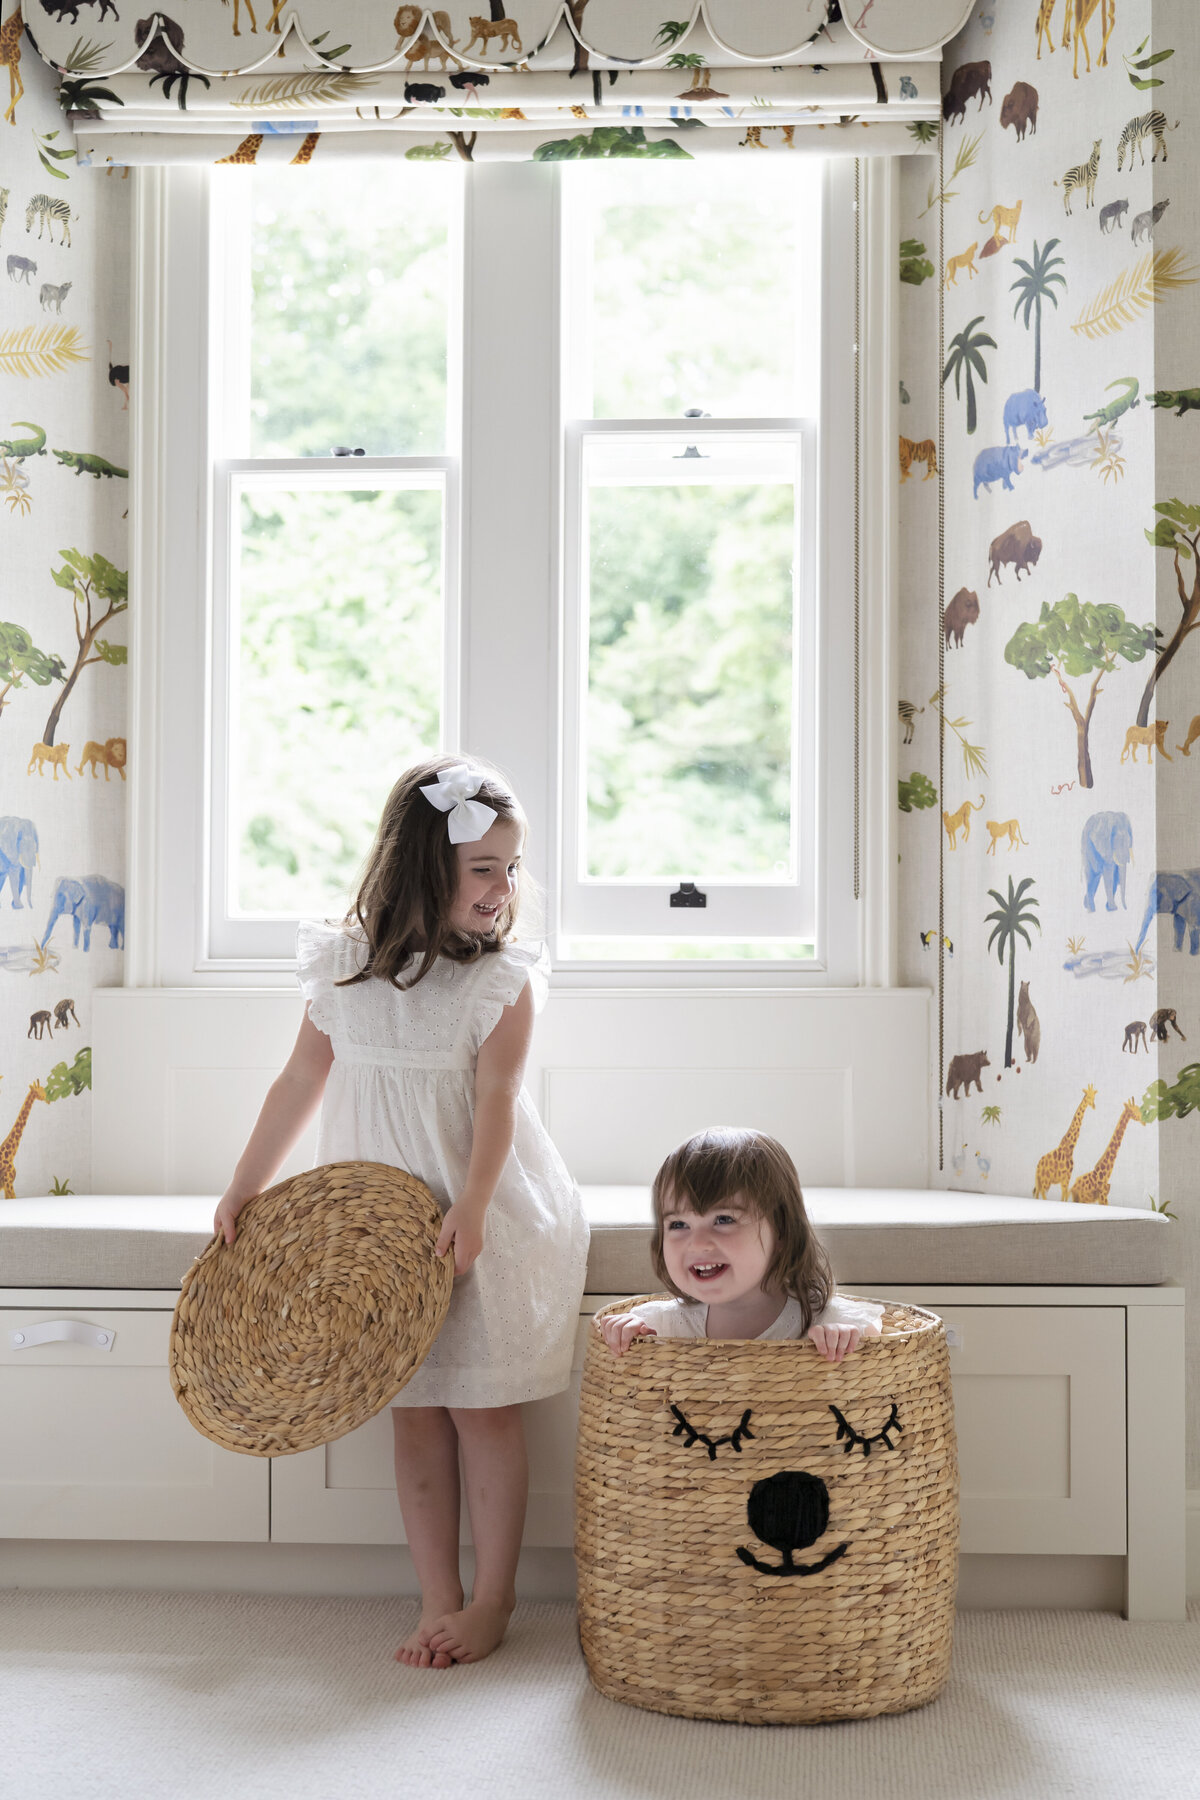 Sisters playing in their nursery. The younger girl is hiding inside a bear storage basket.